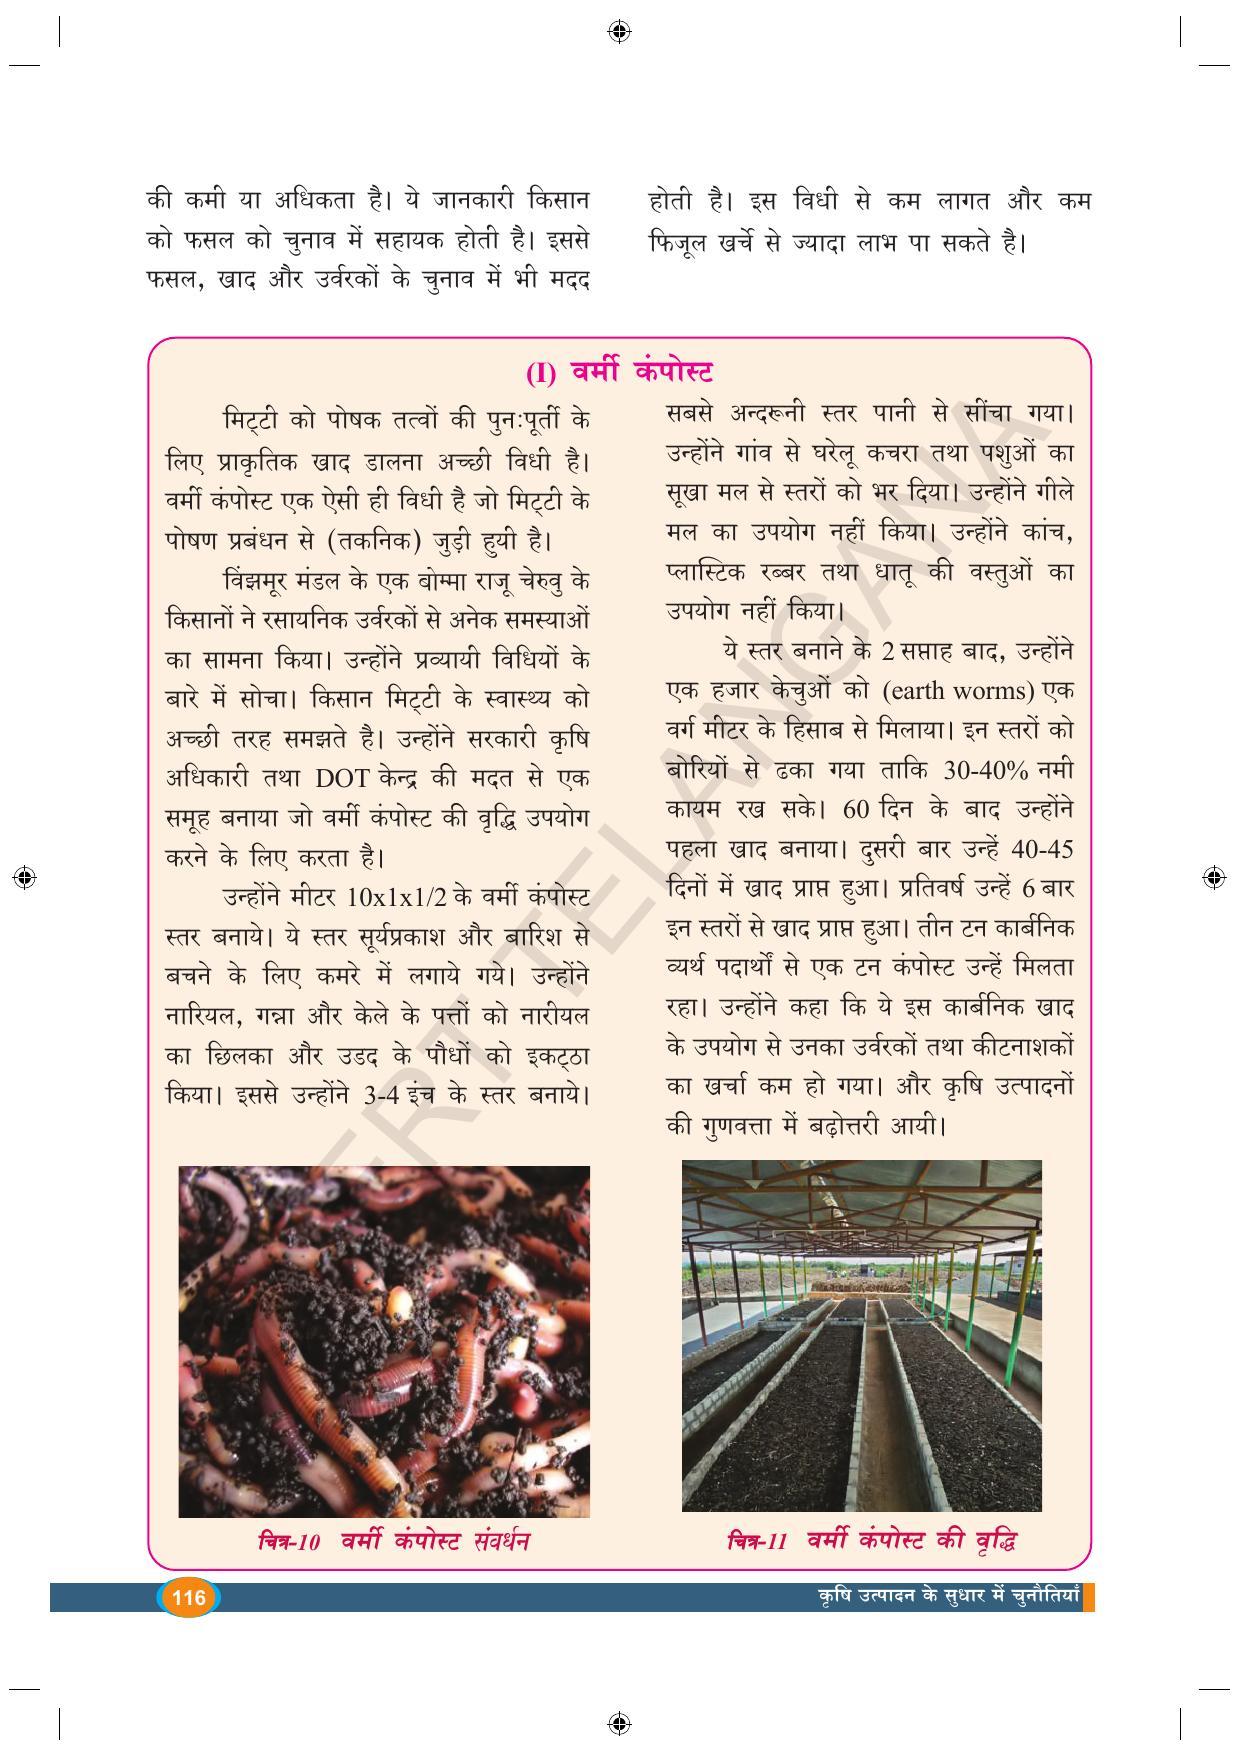 TS SCERT Class 9 Biological Science (Hindi Medium) Text Book - Page 128